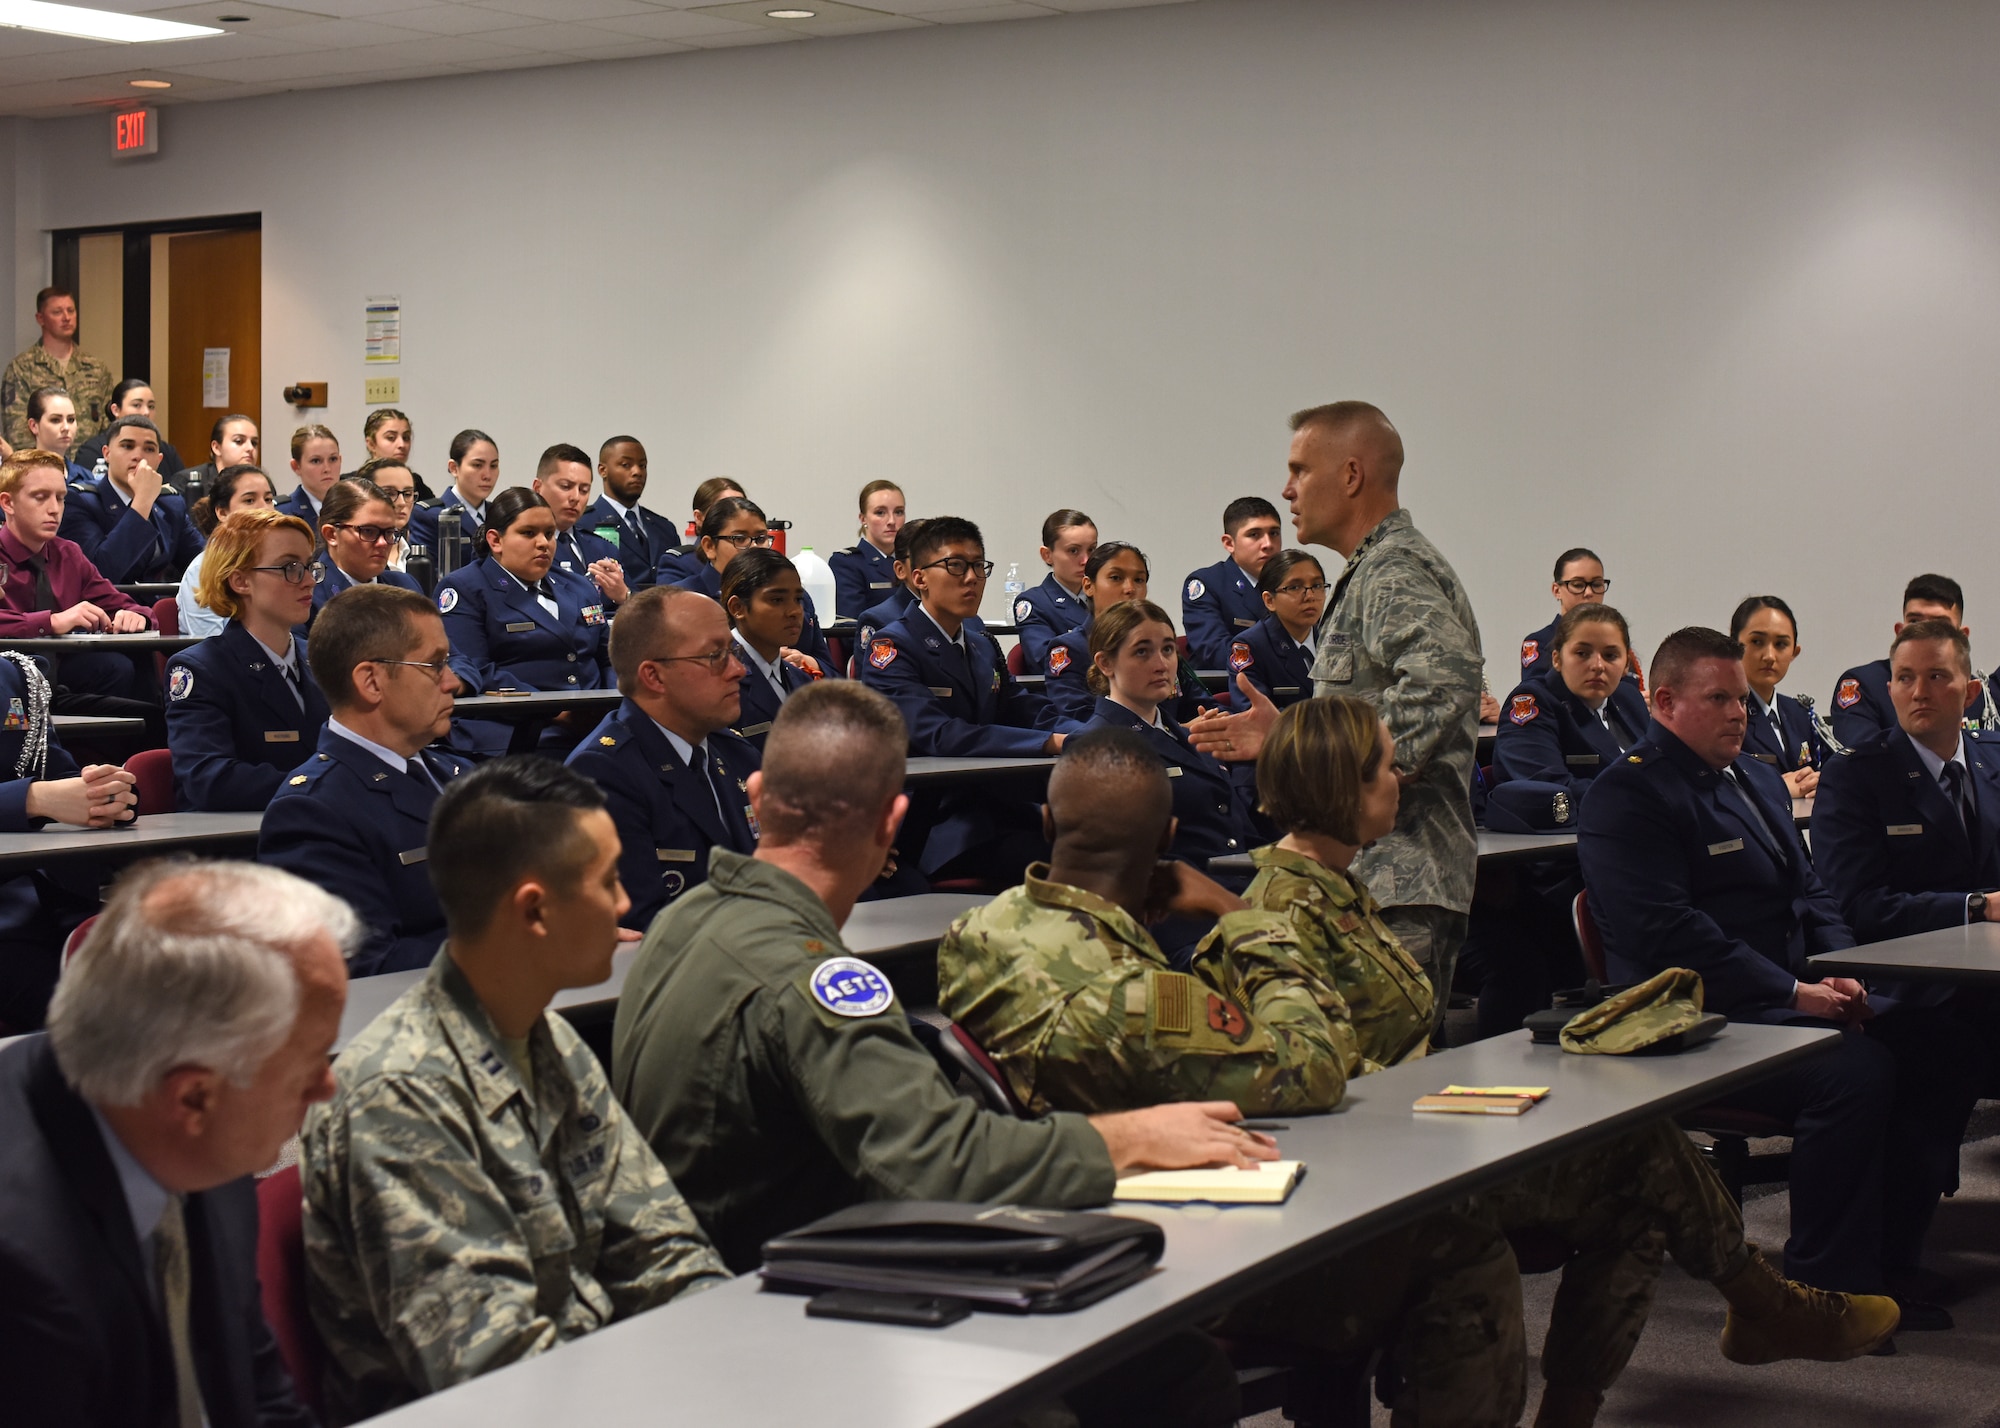 U.S. Air Force Lt. Gen. Steve Kwast, commander of Air Education and Training Command, addresses Junior Air Force ROTC and ROTC students during his visit of Angelo State University in San Angelo, Texas, March 20, 2019. Kwast spoke with the students about the importance of bringing in new points of view to innovate and defend against future threats. (U.S. Air Force photo by Airman 1st Class Zachary Chapman/Released)